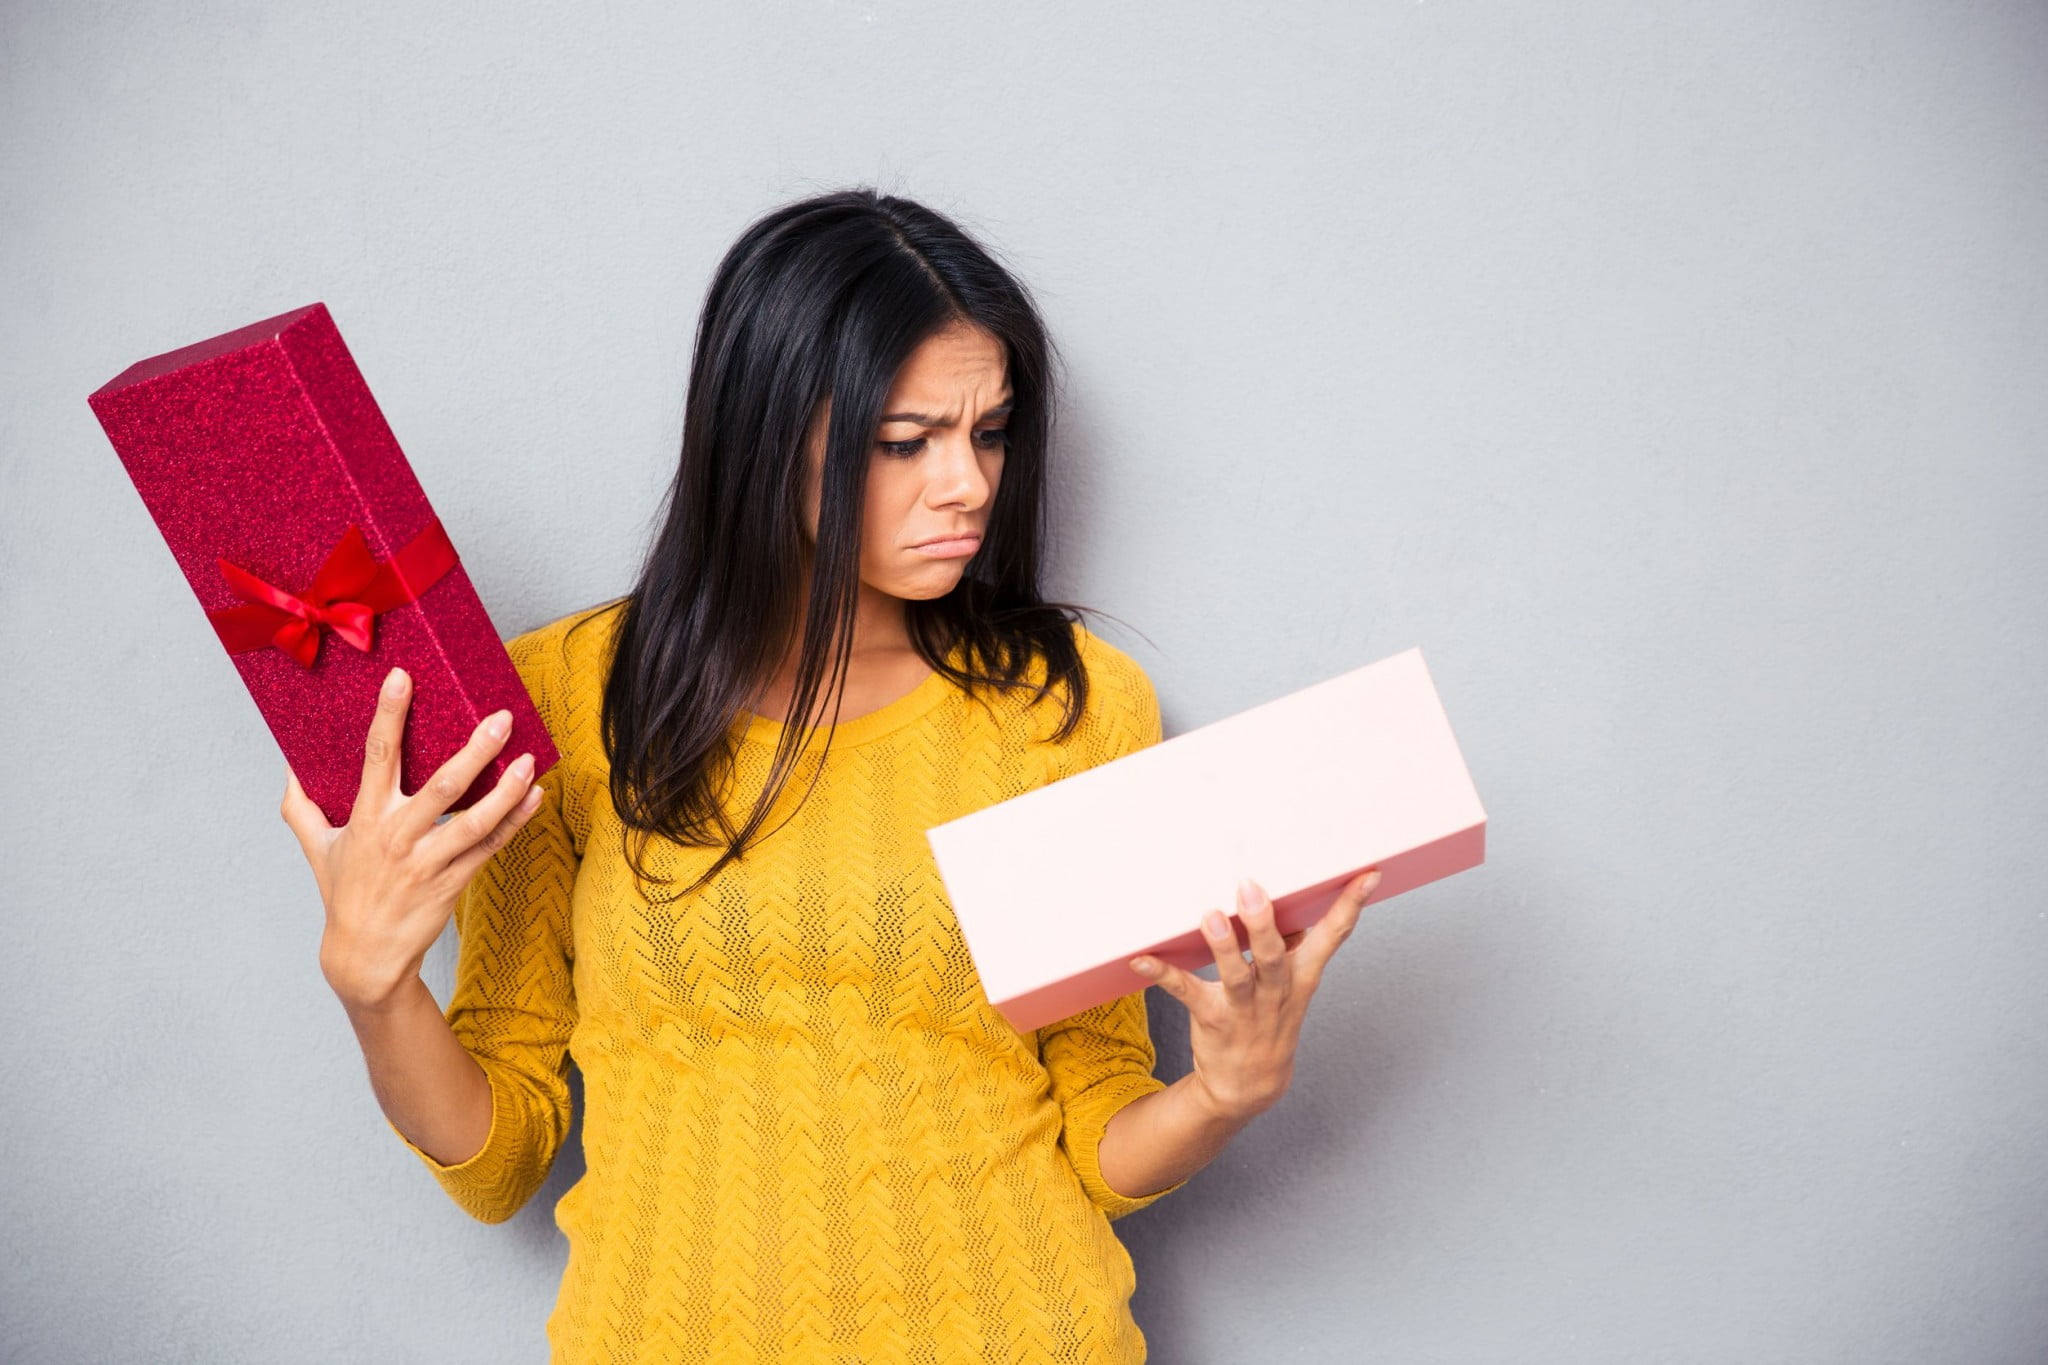 Woman opens Christmas gift and is unimpressed